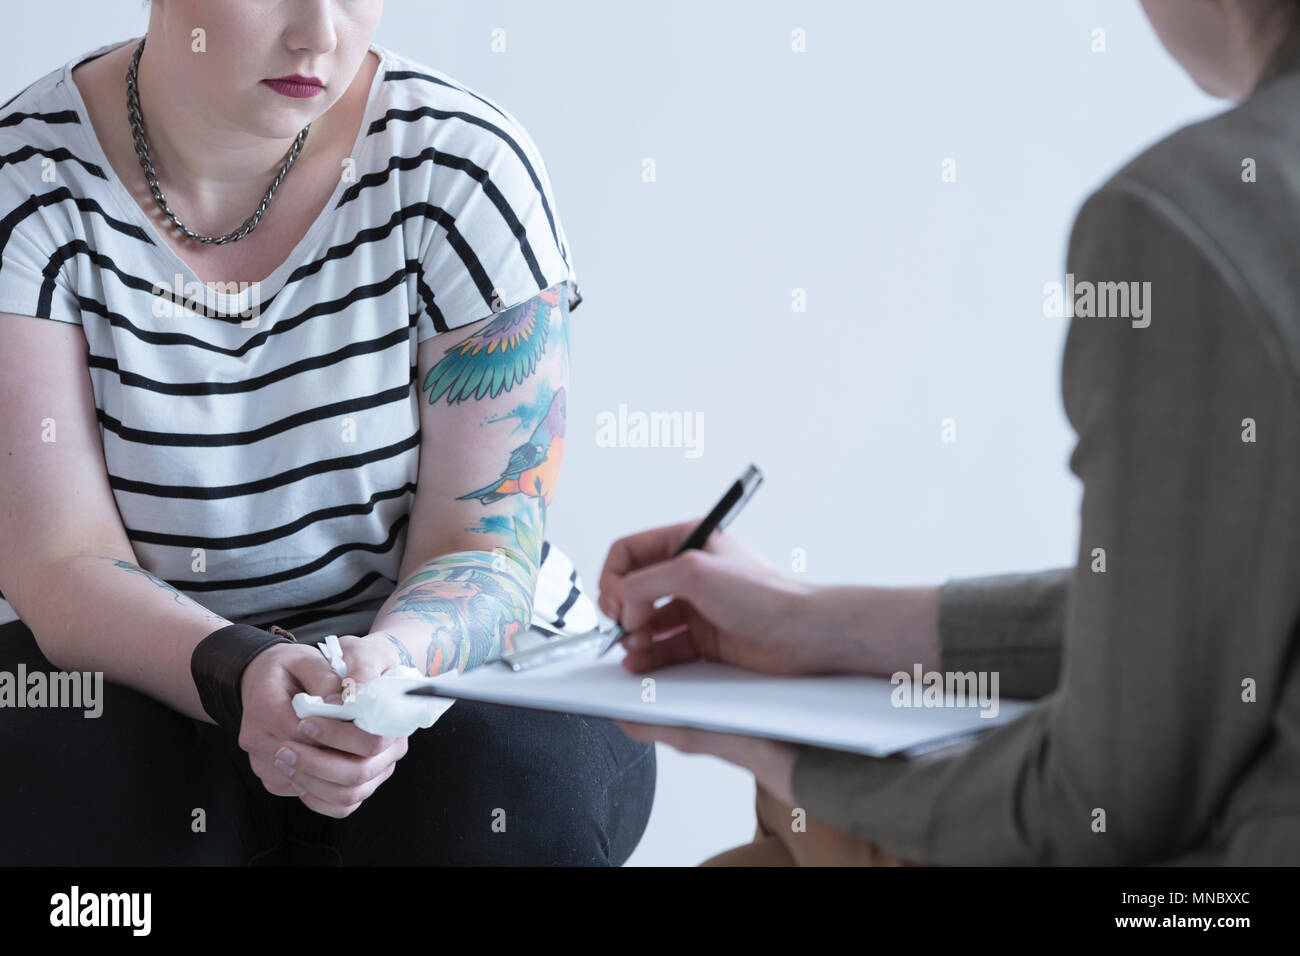 Rebellious girl with tattoo and school psychologist Stock Photo